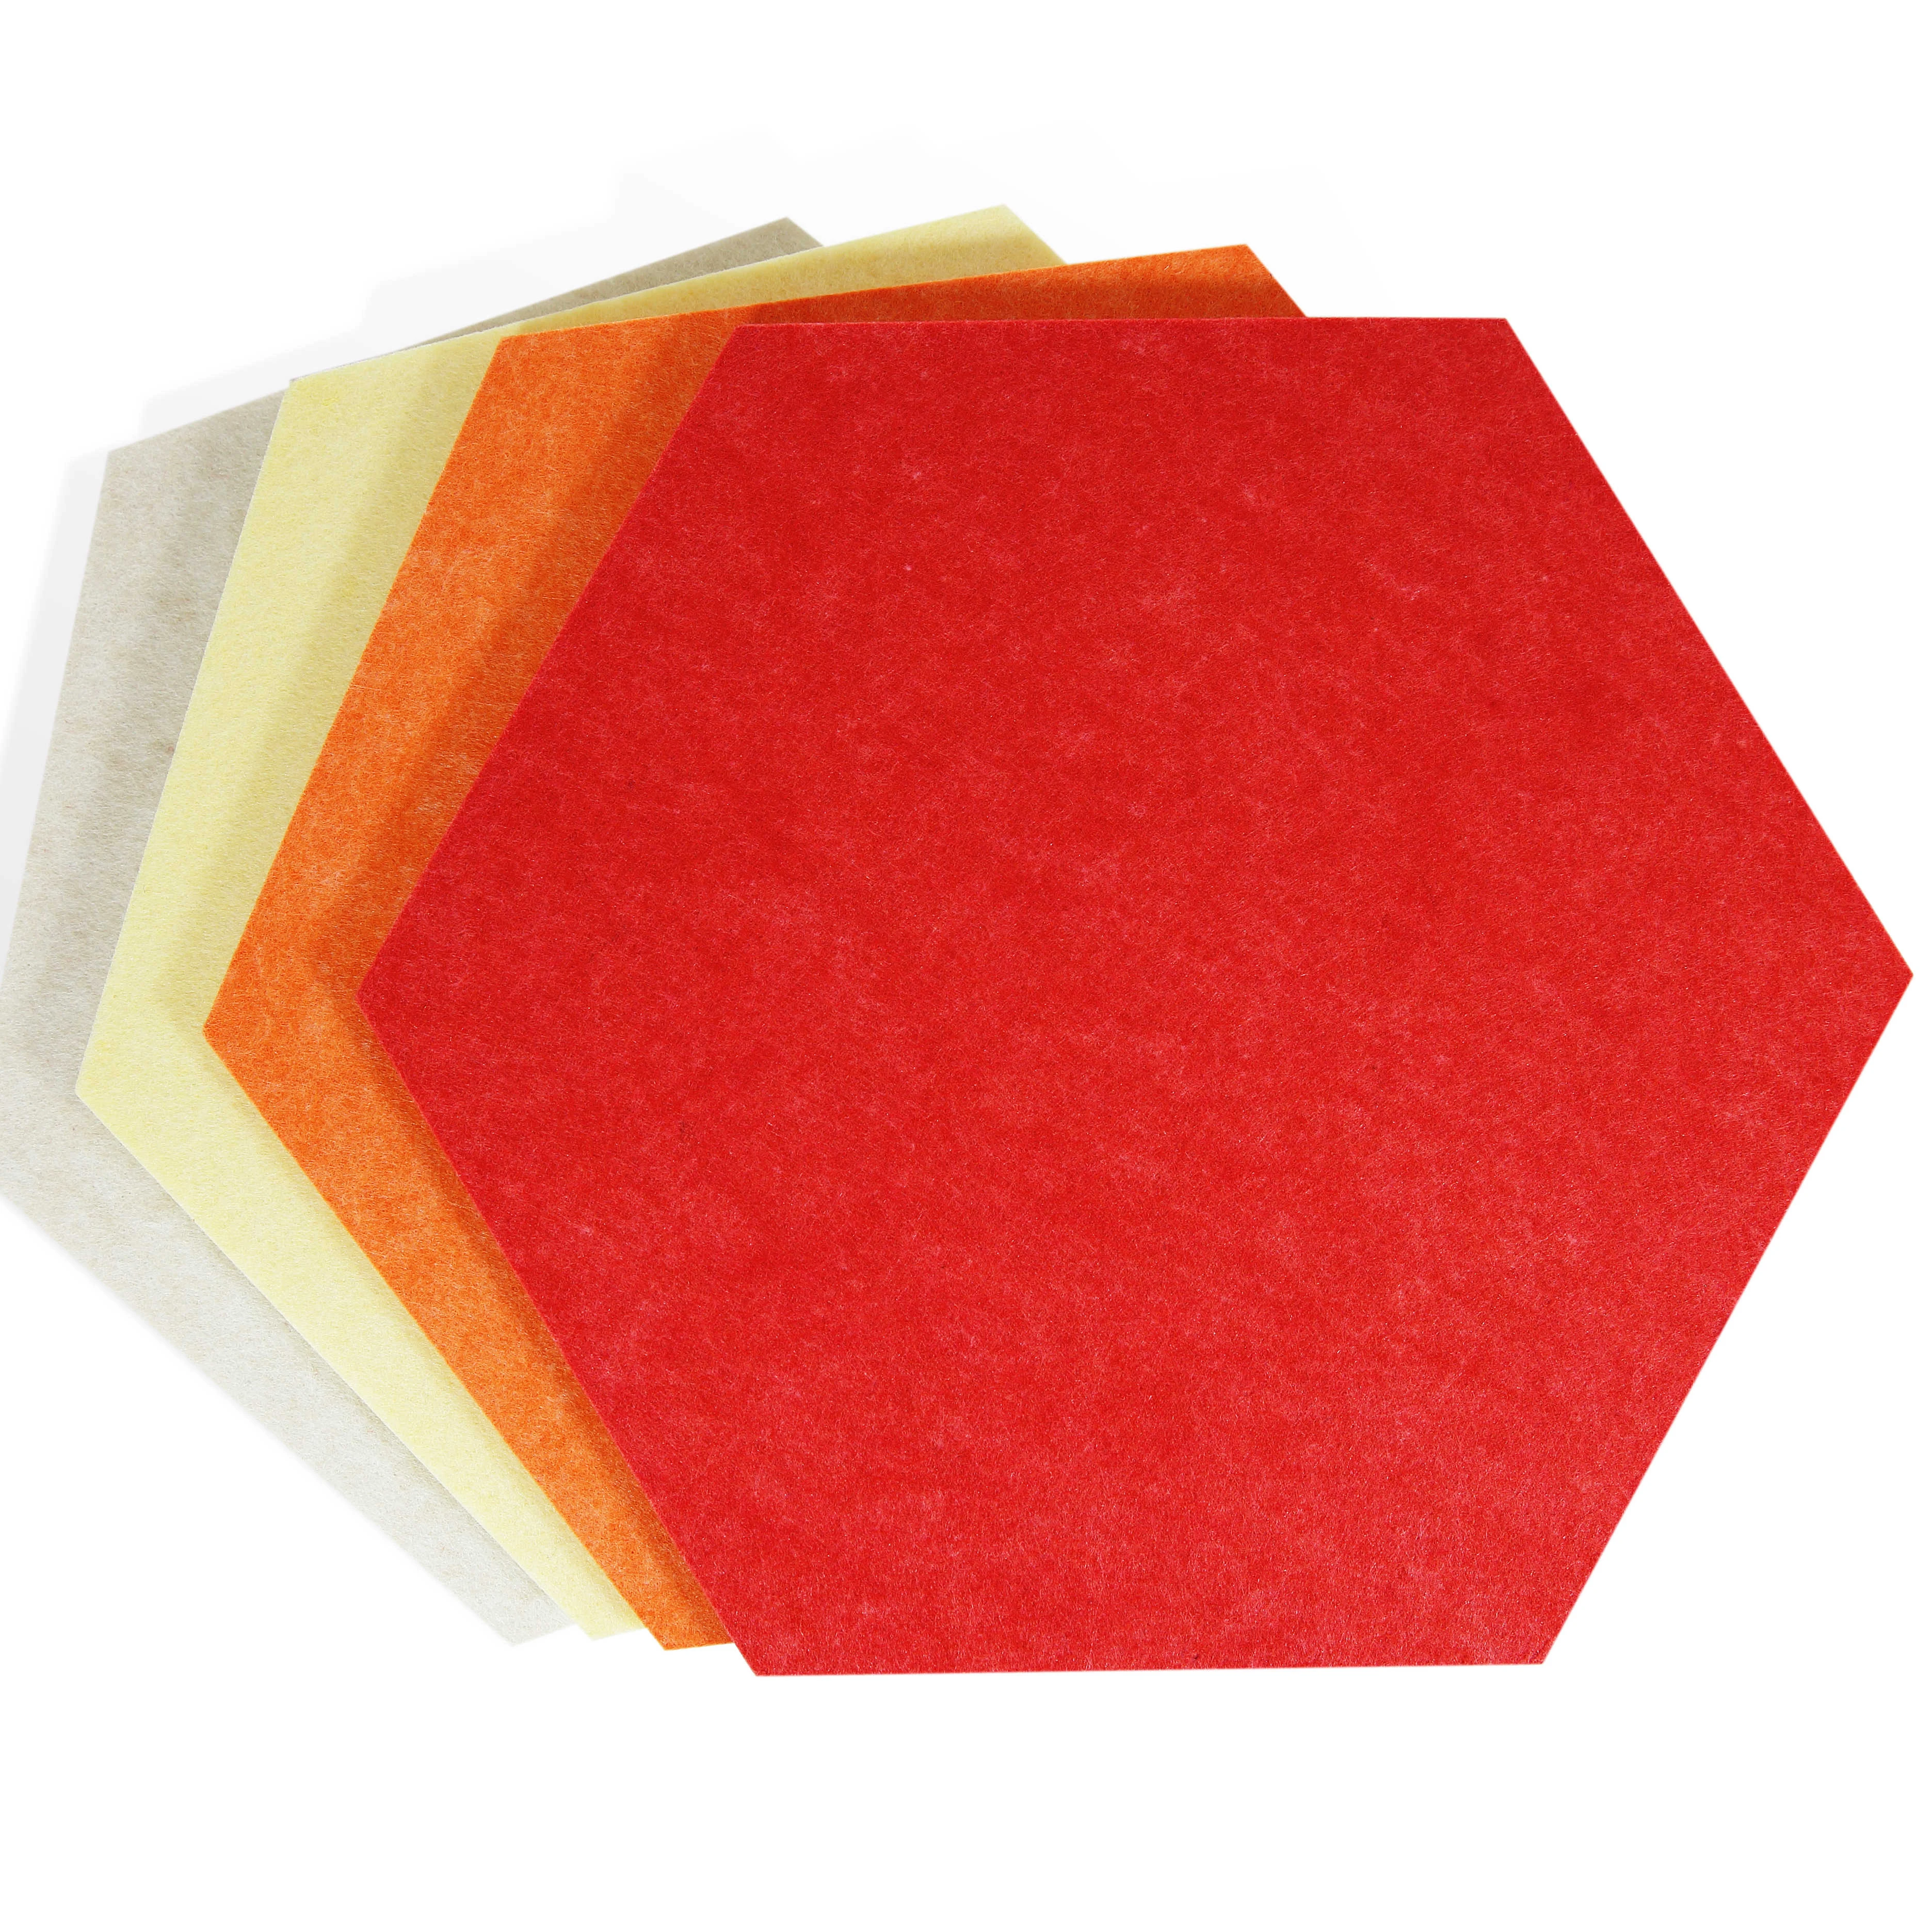 Hexagon 9mm/12mm Acoustic Panel sound absorption material Decorative (1600390143713)